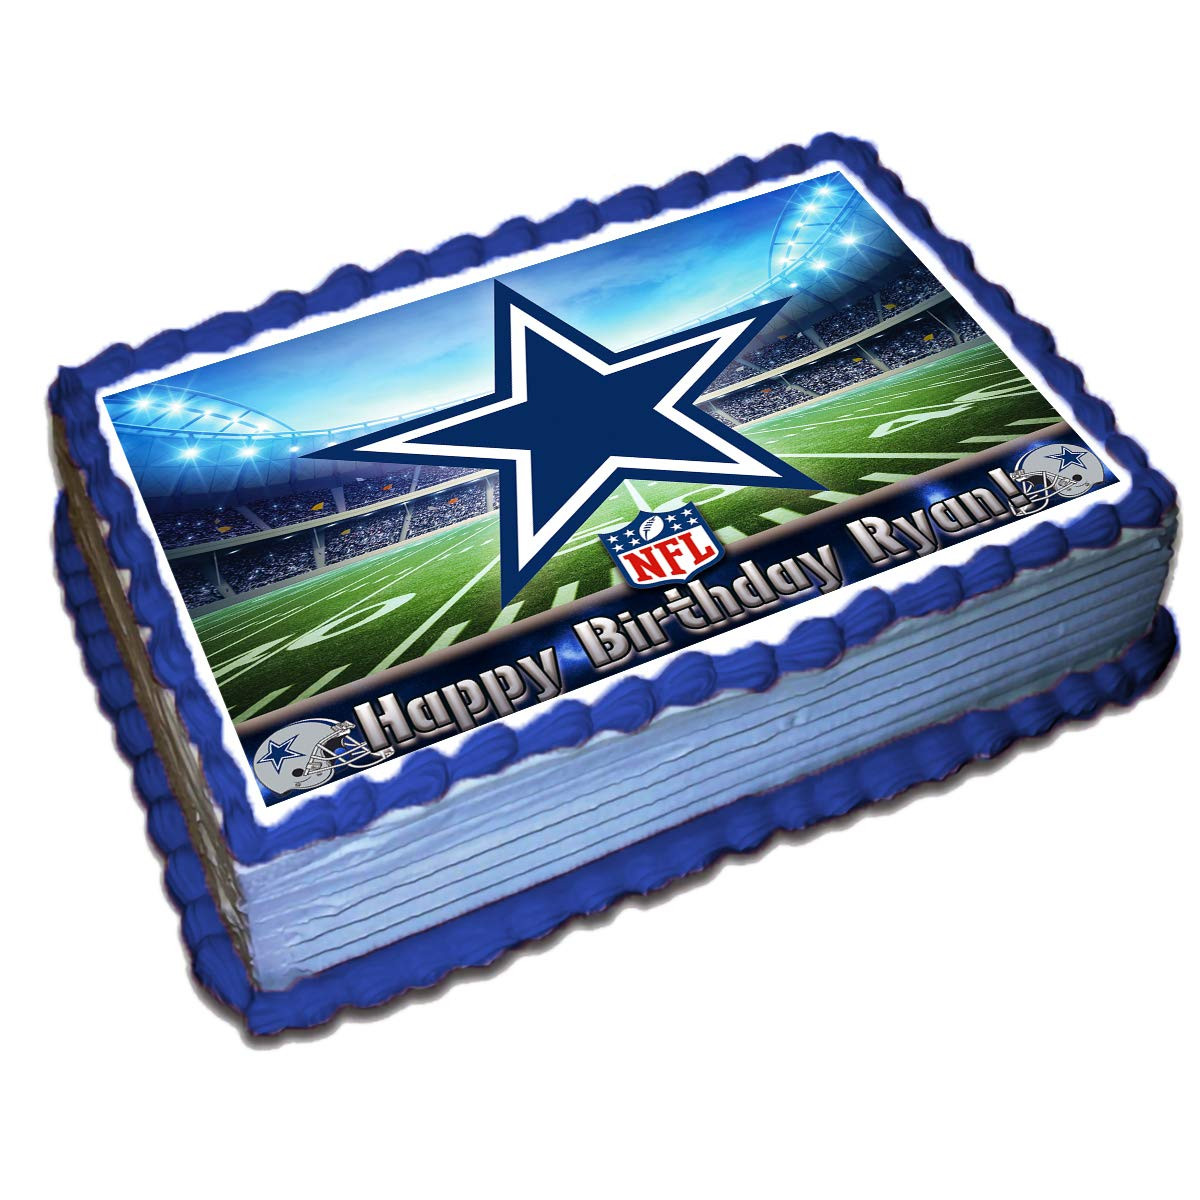 Dallas Cowboys Birthday Cakes
 20 Best Dallas Cowboys Party Decorations and Supplies